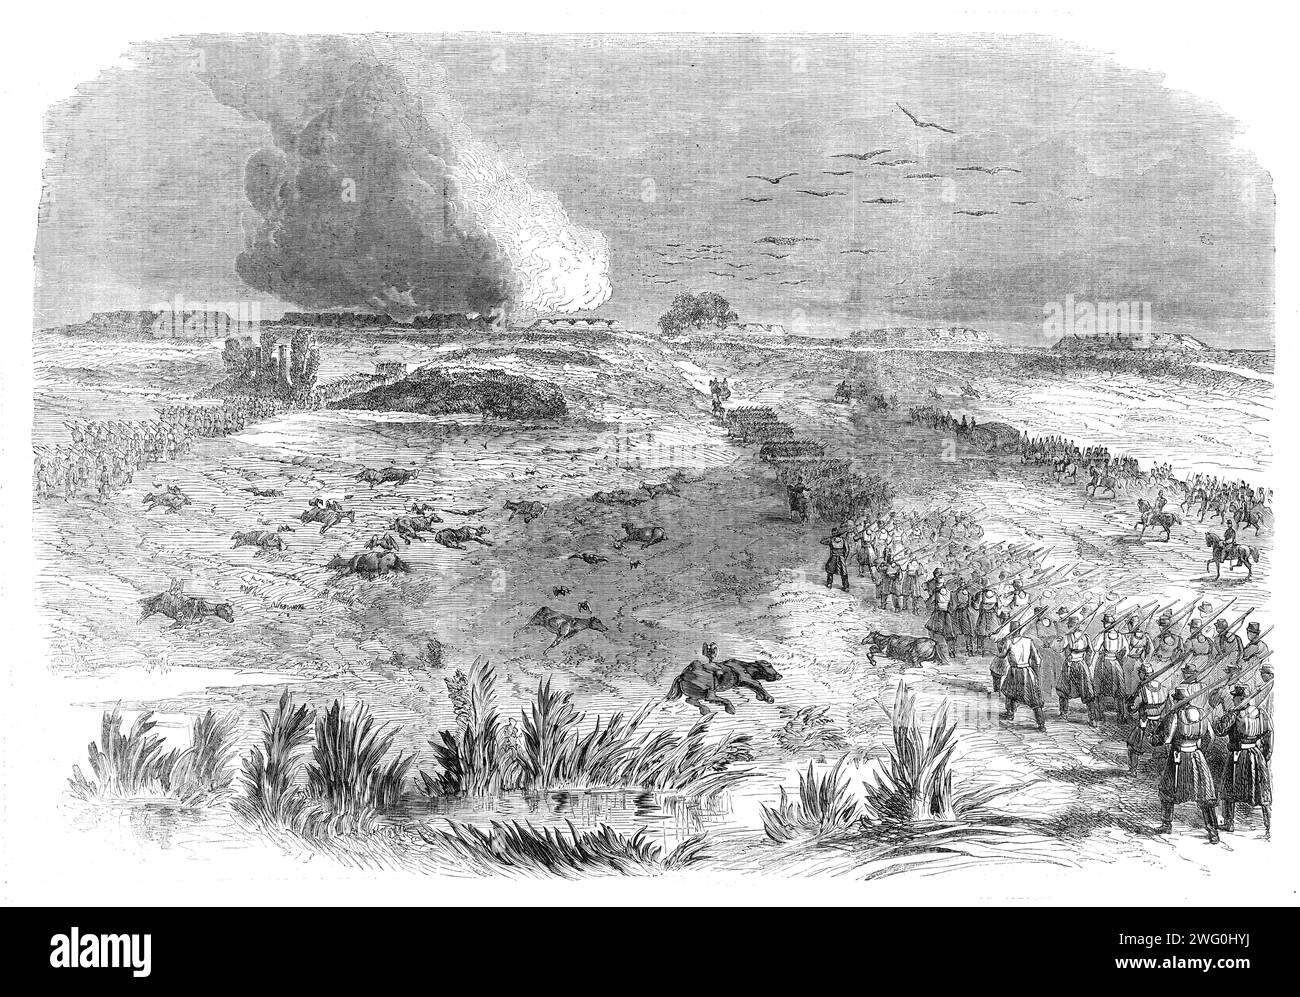 The Civil War in America: Federals advancing on the abandoned Confederate positions at Centreville - from a sketch by our special artist, 1862. 'On the 10th March the advance of the Federal forces on Centreville and Manassas took place - the subject of the Engraving...being the approach of the Union column to the abandoned Confederate works on Centreville heights. Beyond is seen the smoke from one of the numerous burning camps destroyed by the Secessionists on evacuating the positions. Many of the &quot;guns&quot; in the forts were dummies, being nothing more that huge painted logs placed ther Stock Photo